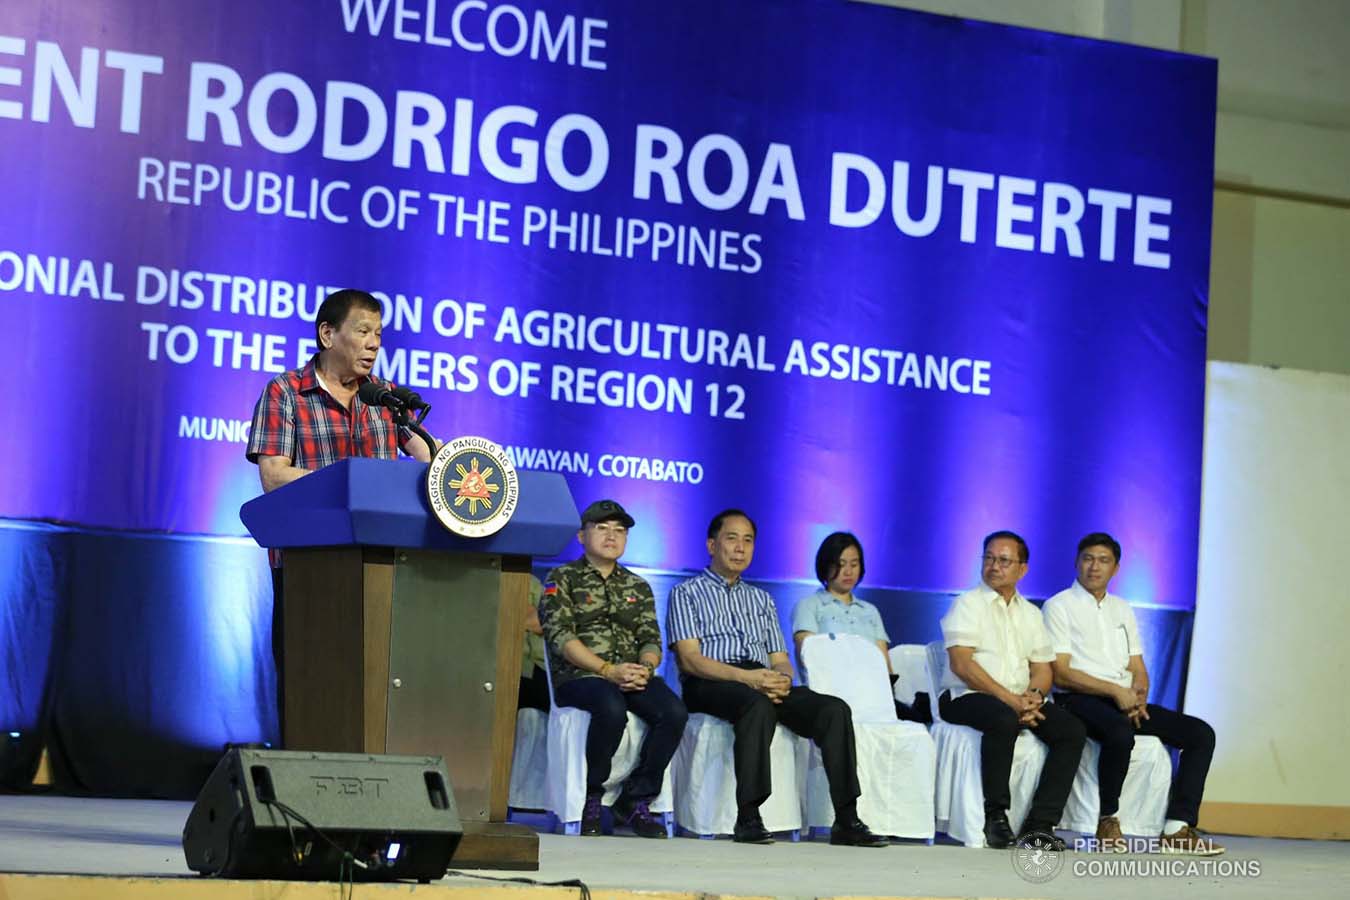 President Rodrigo Roa Duterte delivers a speech during the ceremonial distribution of agricultural assistance to the farmers of Region 12 at the Pigcawayan Municipal Gymnasium in Cotabato on January 10, 2020. RICHARD MADELO/PRESIDENTIAL PHOTO